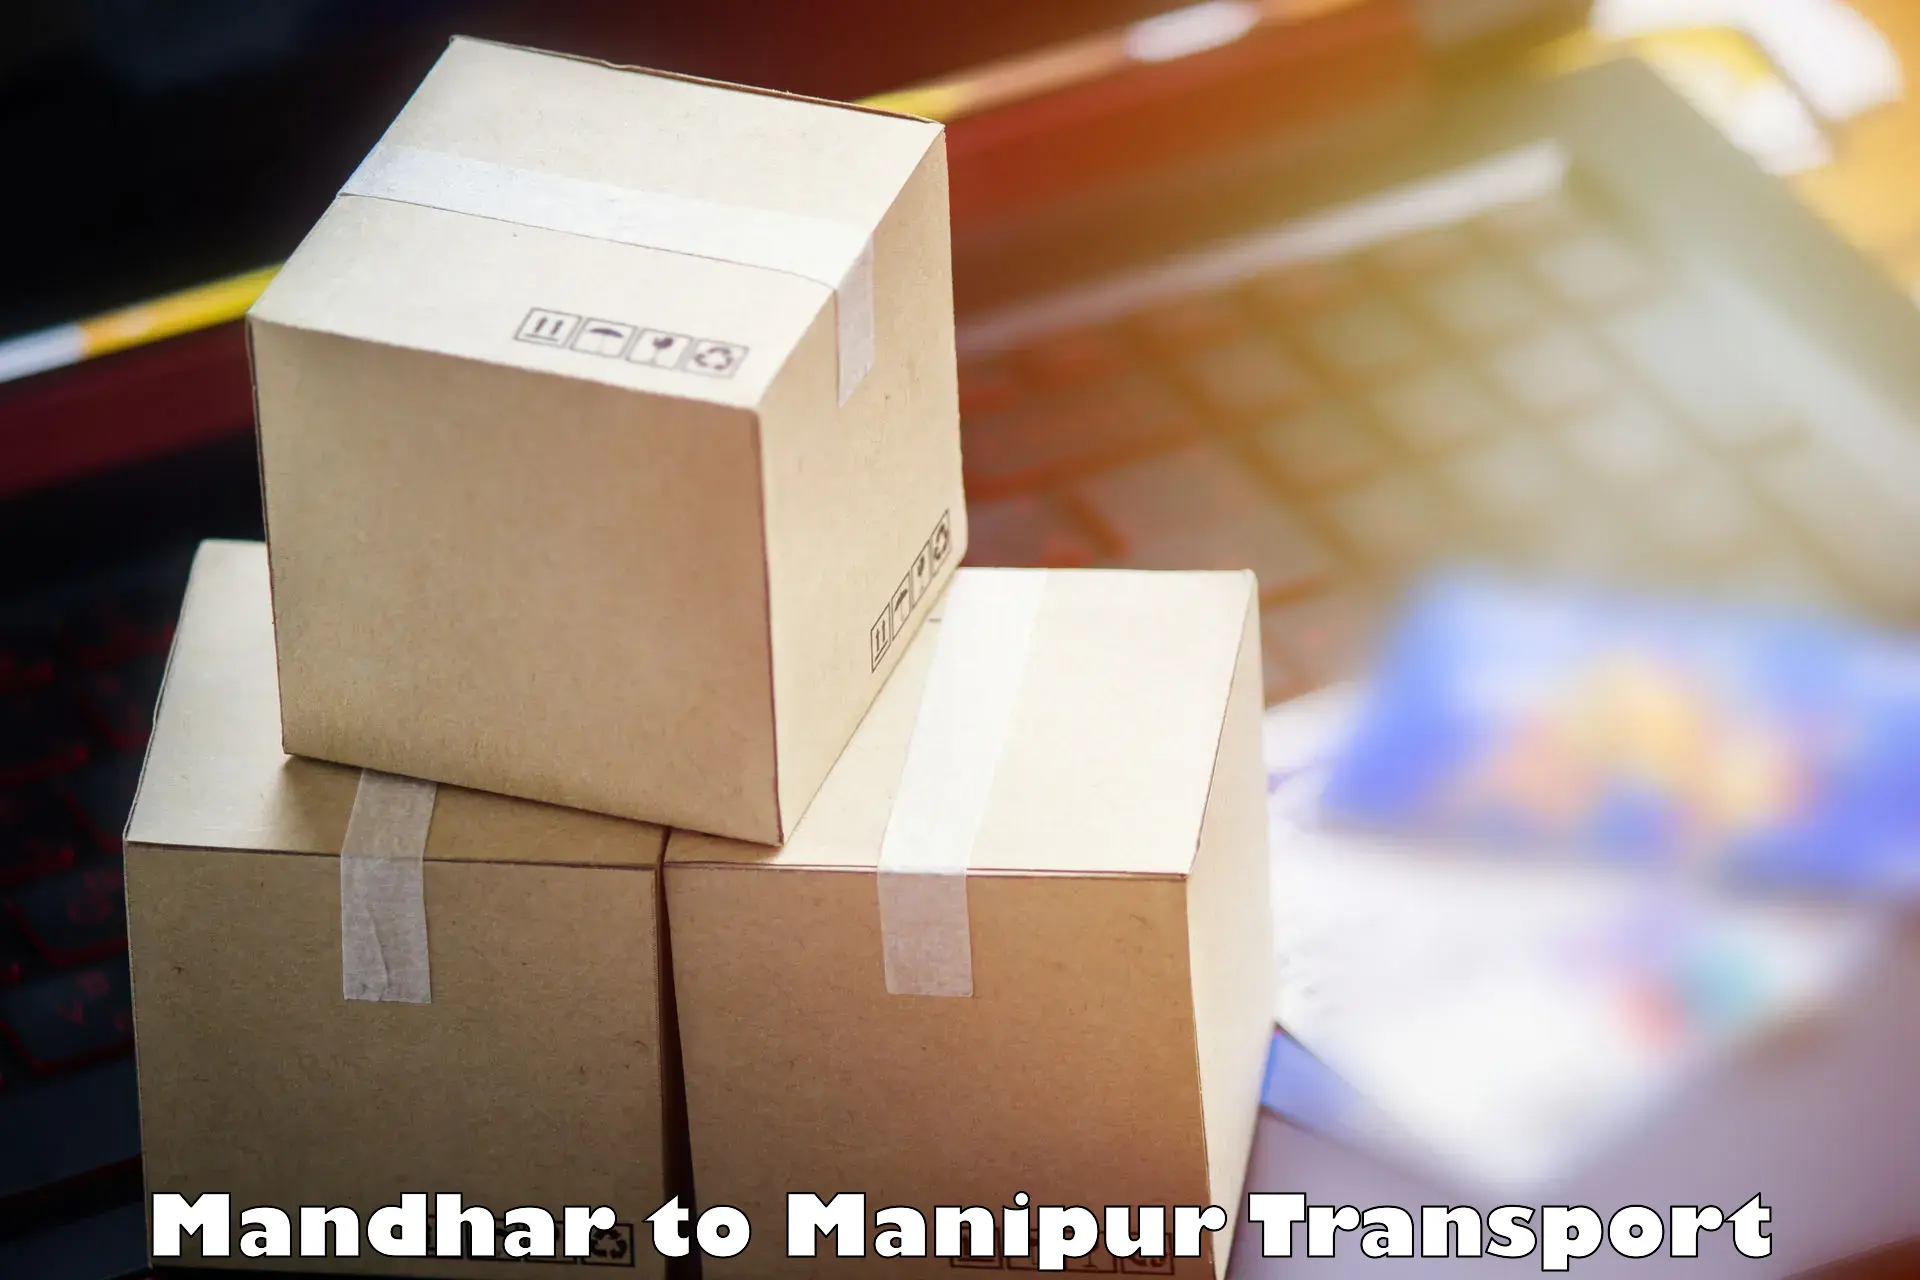 Container transportation services in Mandhar to Chandel